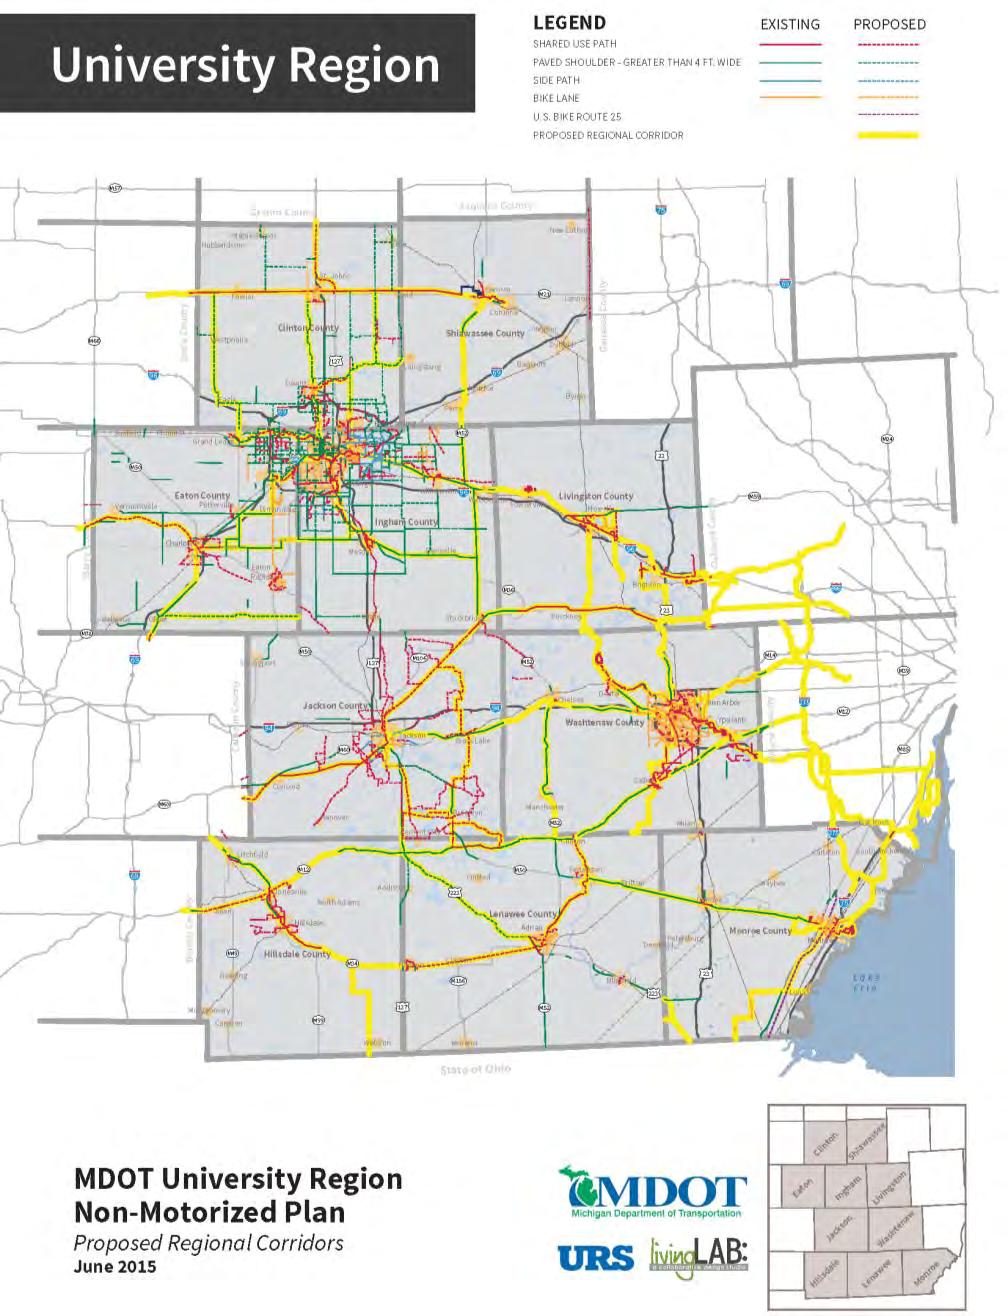 MDOT University Region Non-Motorized Plan In 2015, MDOT prepared a non-motorized plan for the University Region, which includes a 10-county area encompassing Ingham County.